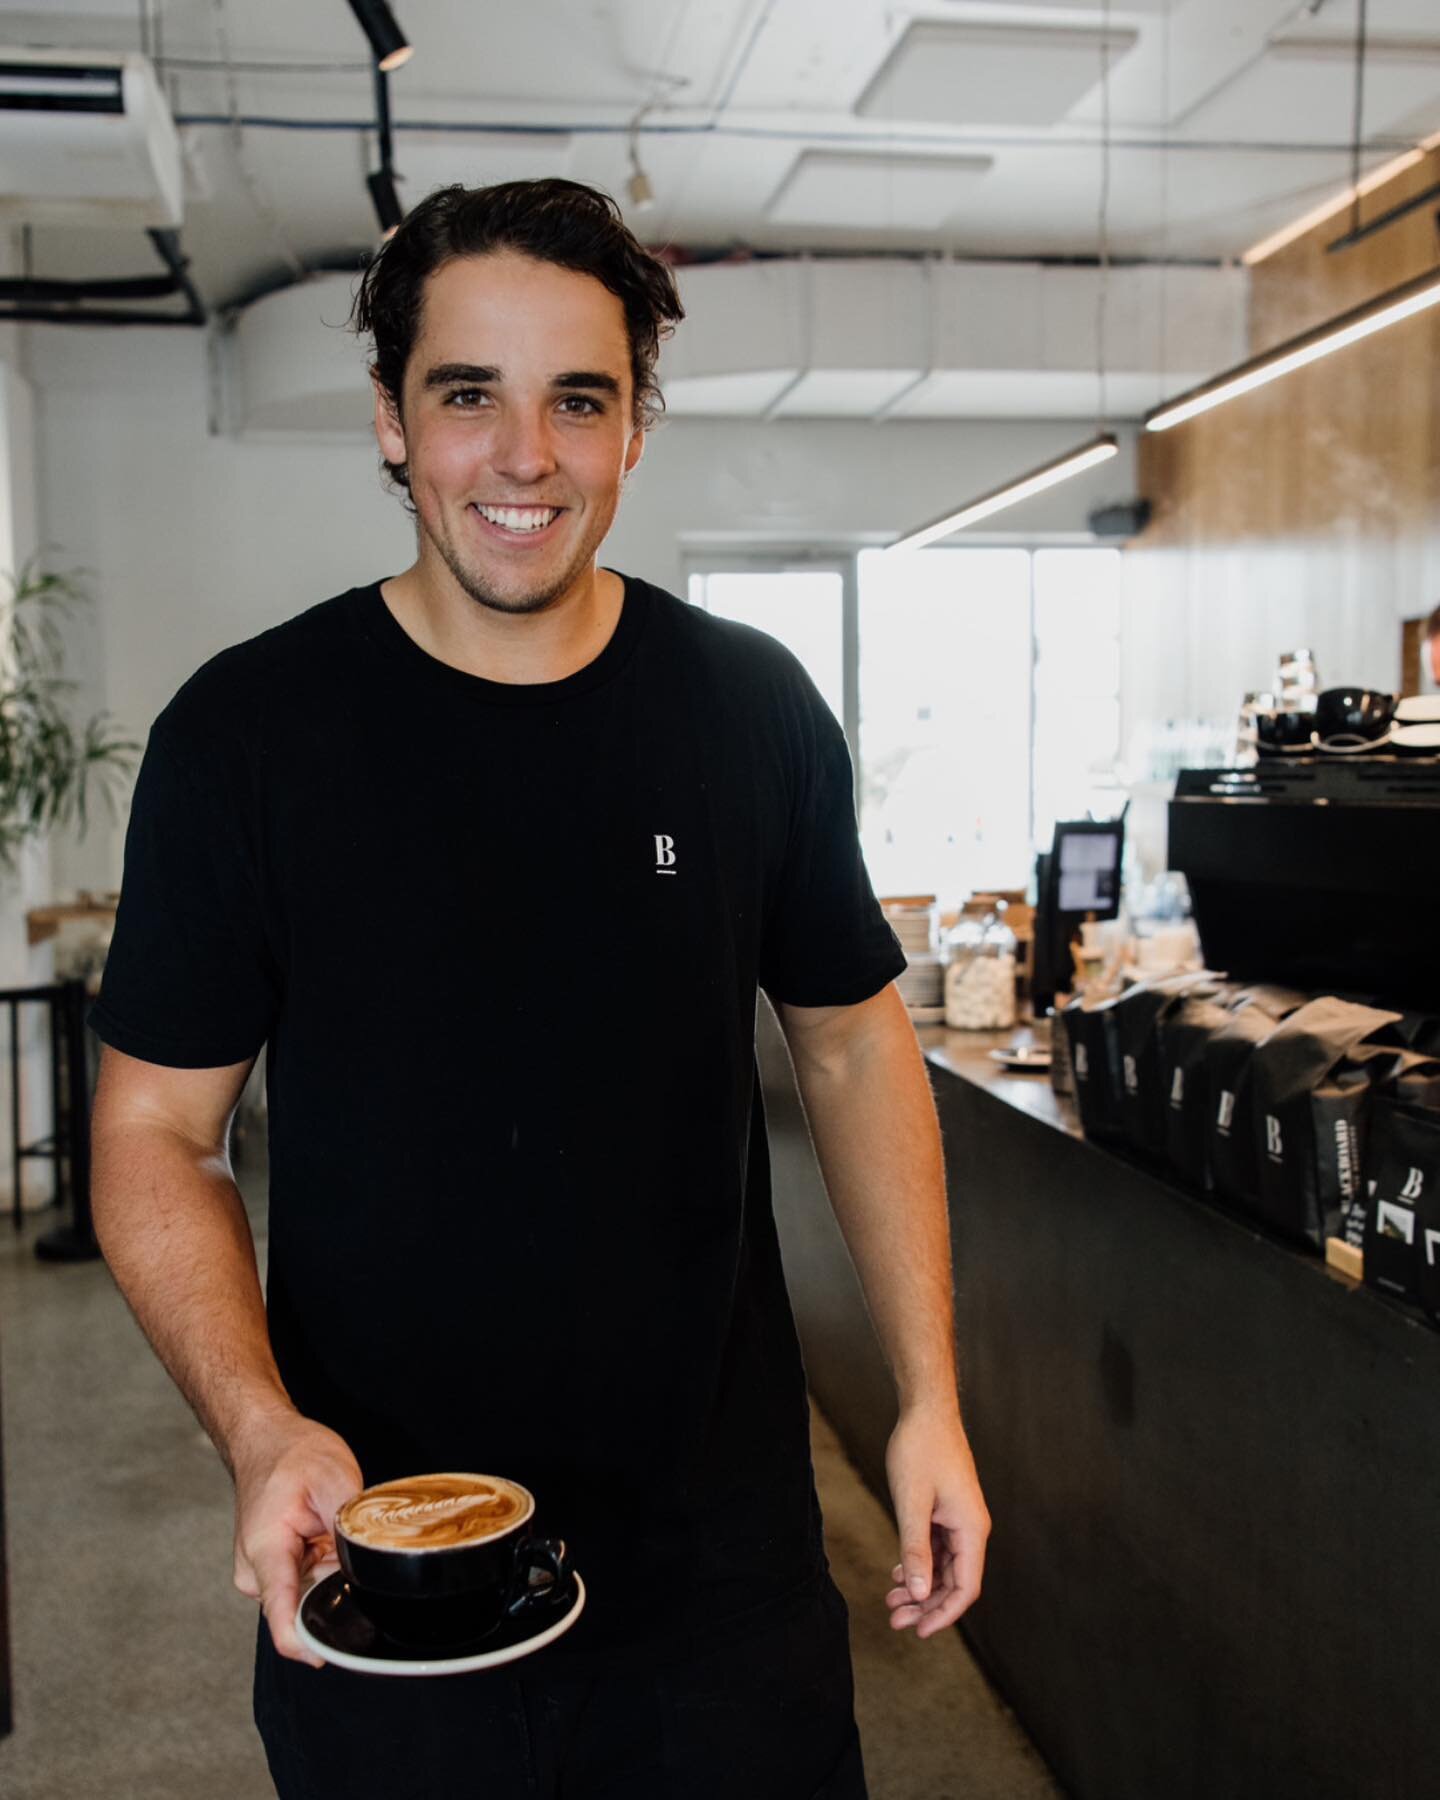 That face when you see your coffee walking towards your 😍